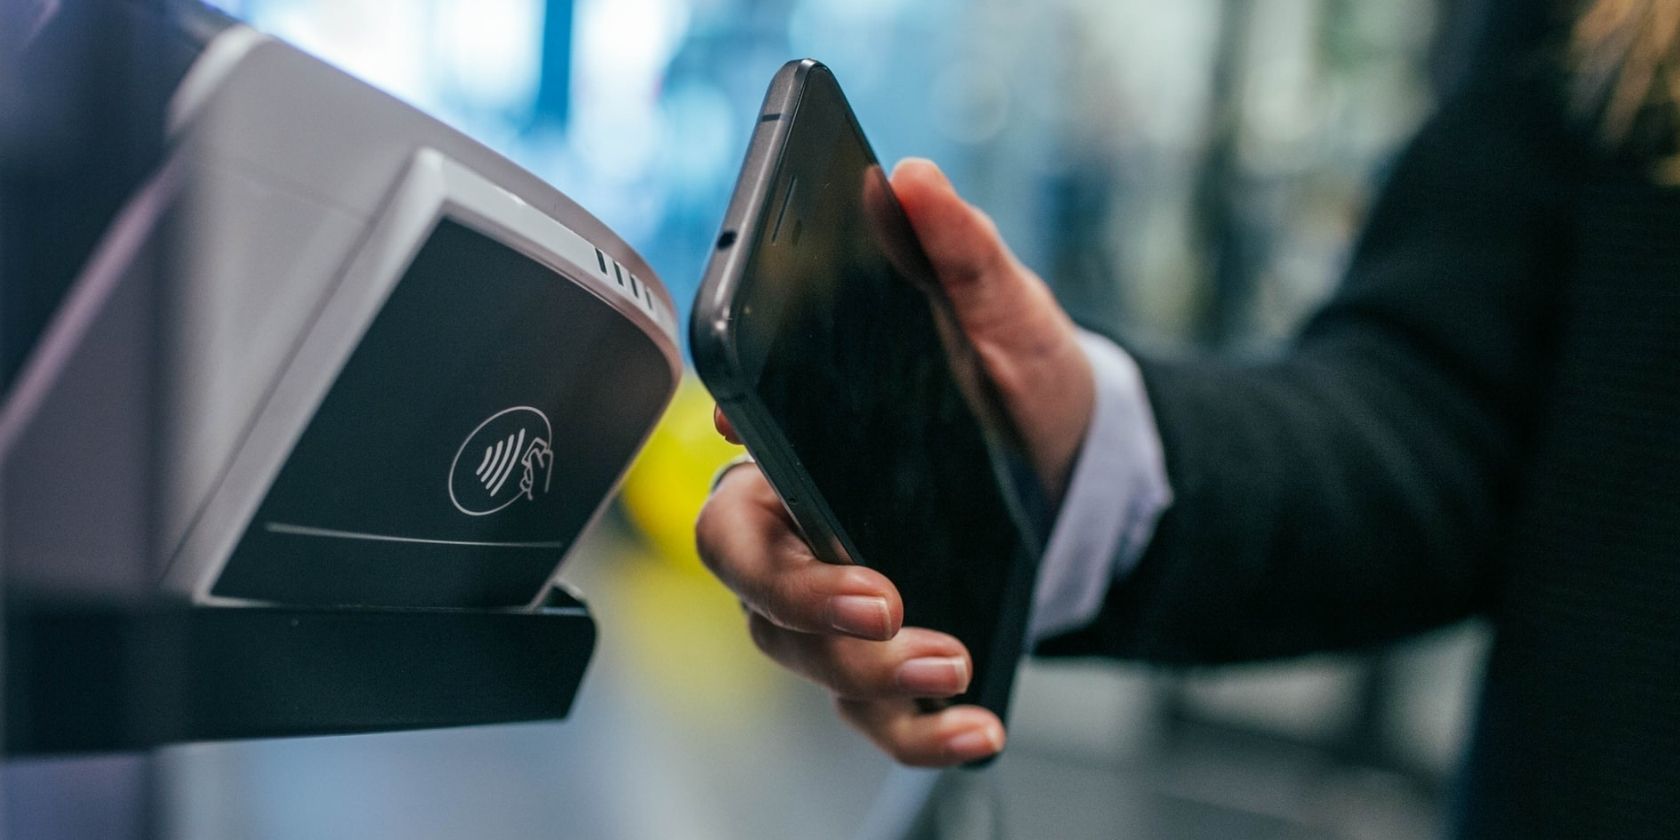 Contactless payment system with phone and payment machine touching